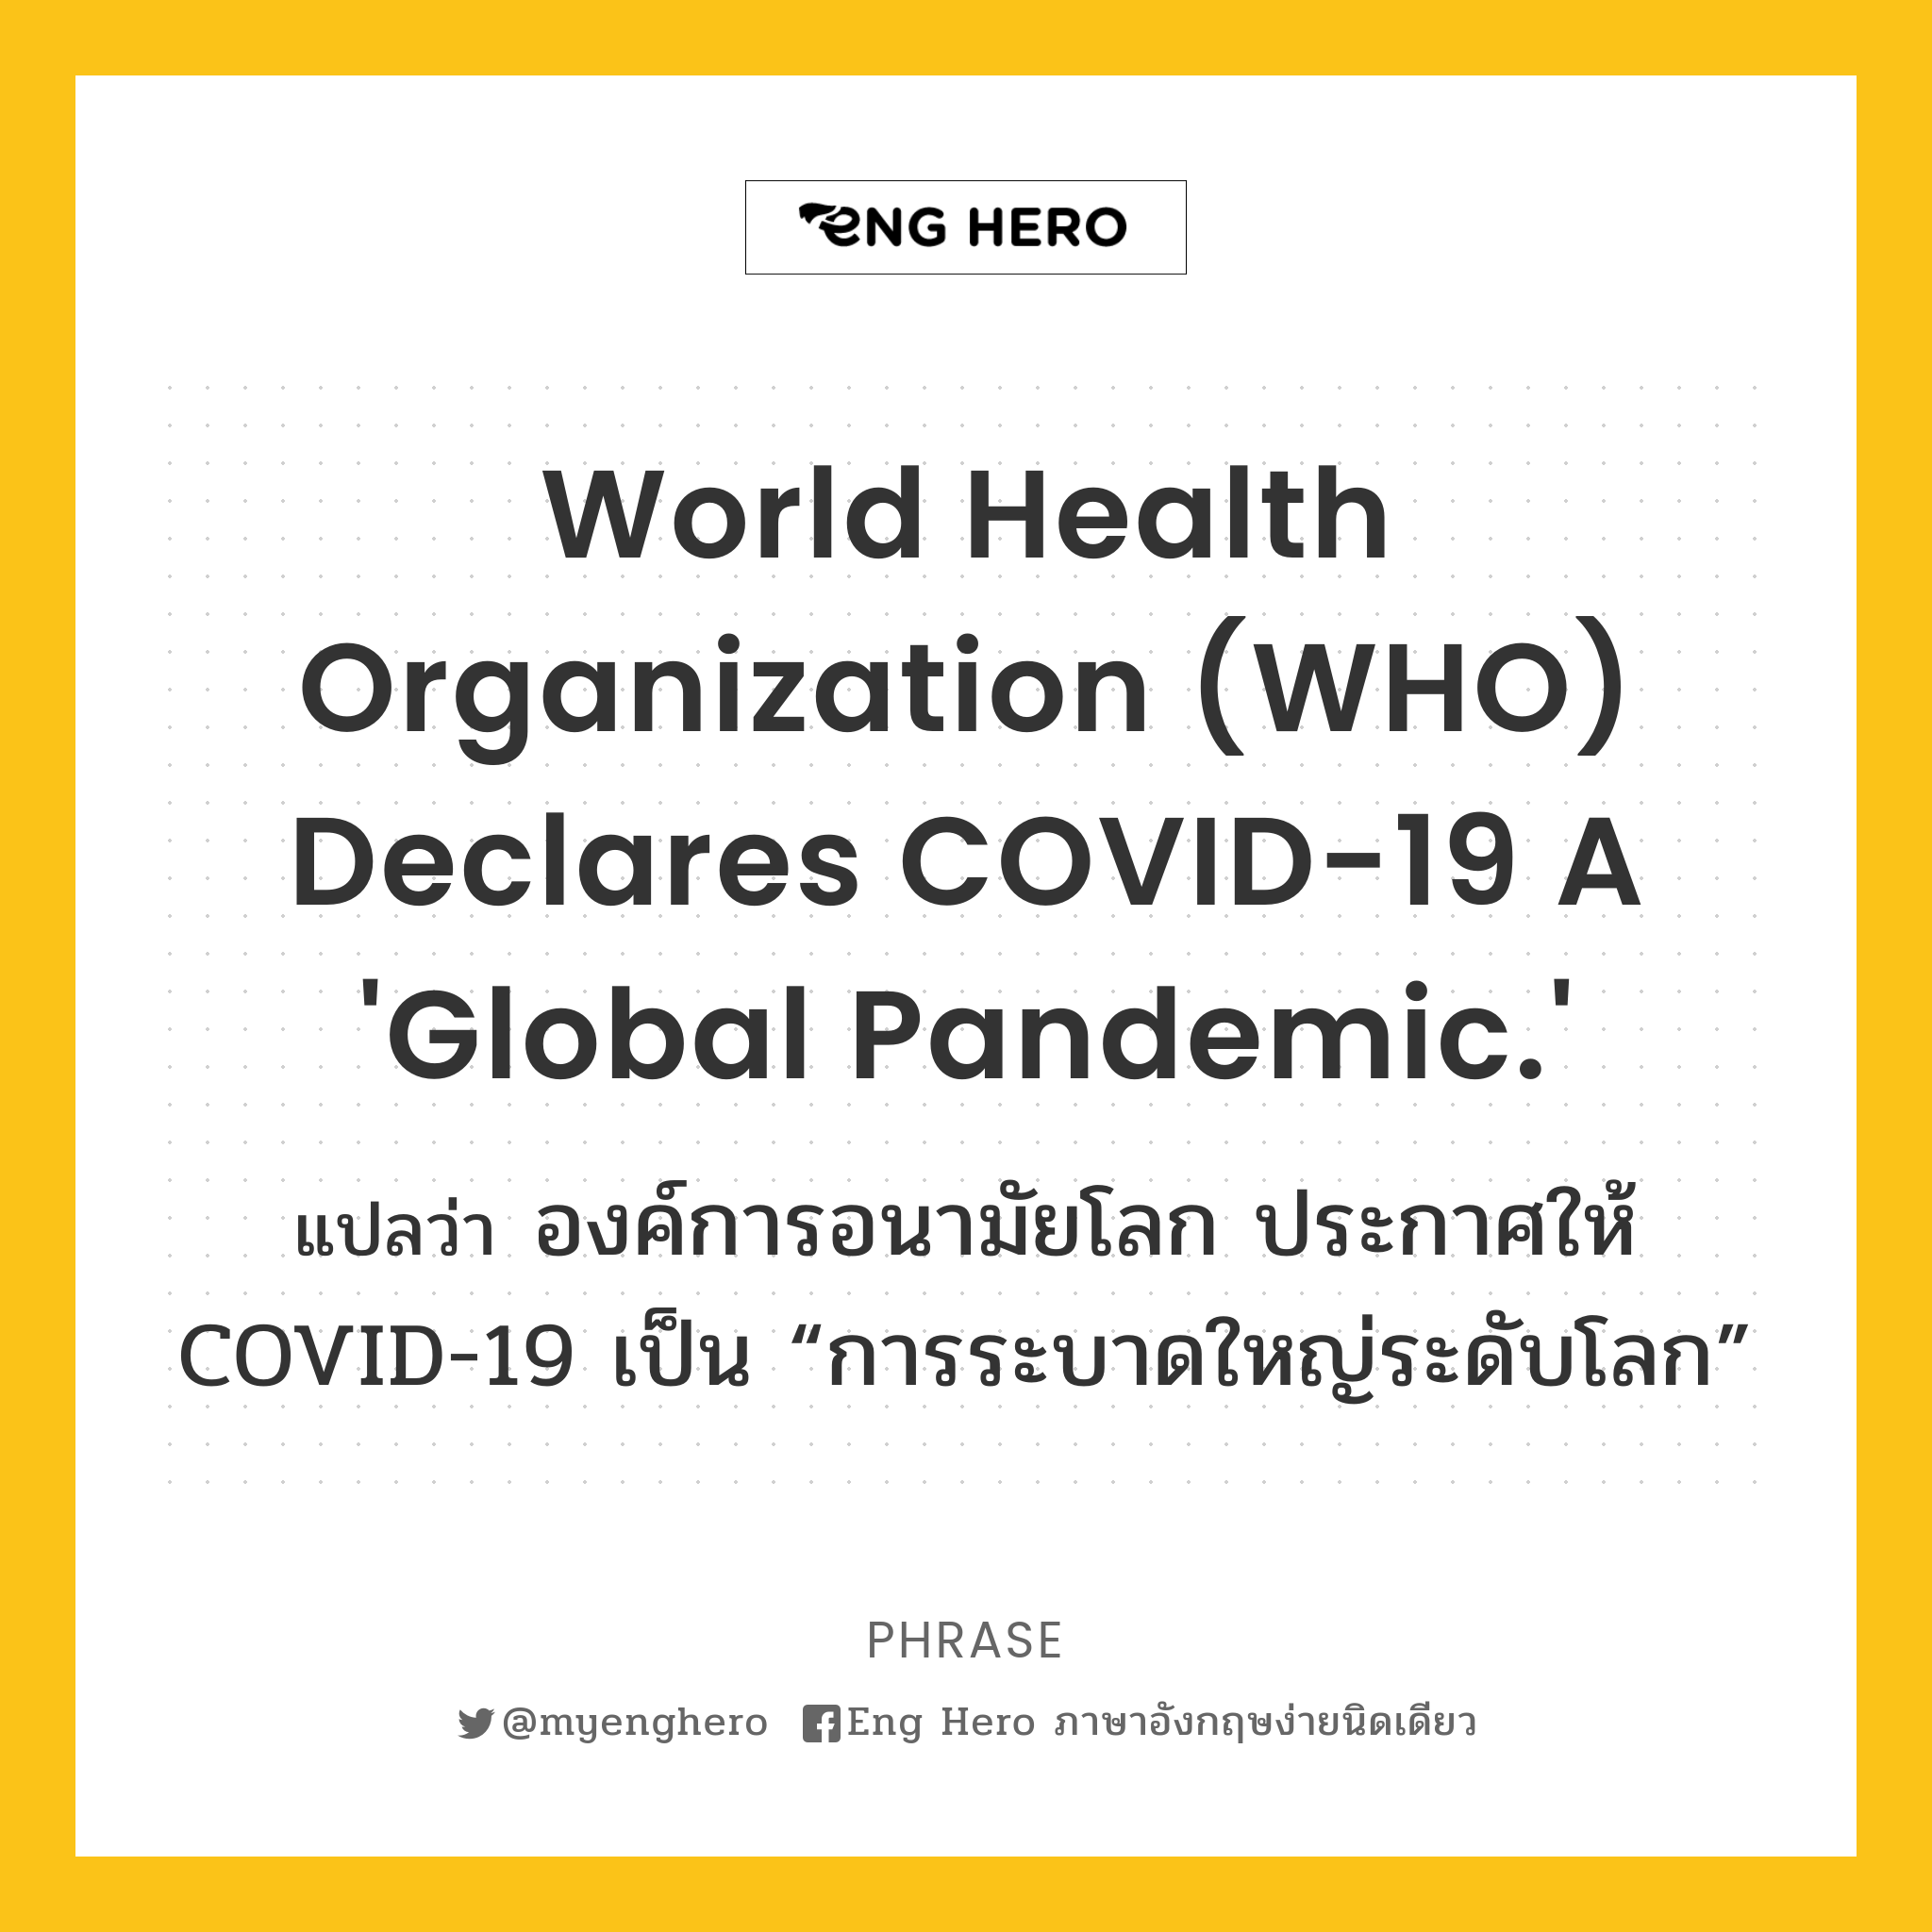 World Health Organization (WHO) Declares COVID-19 a 'Global Pandemic.'